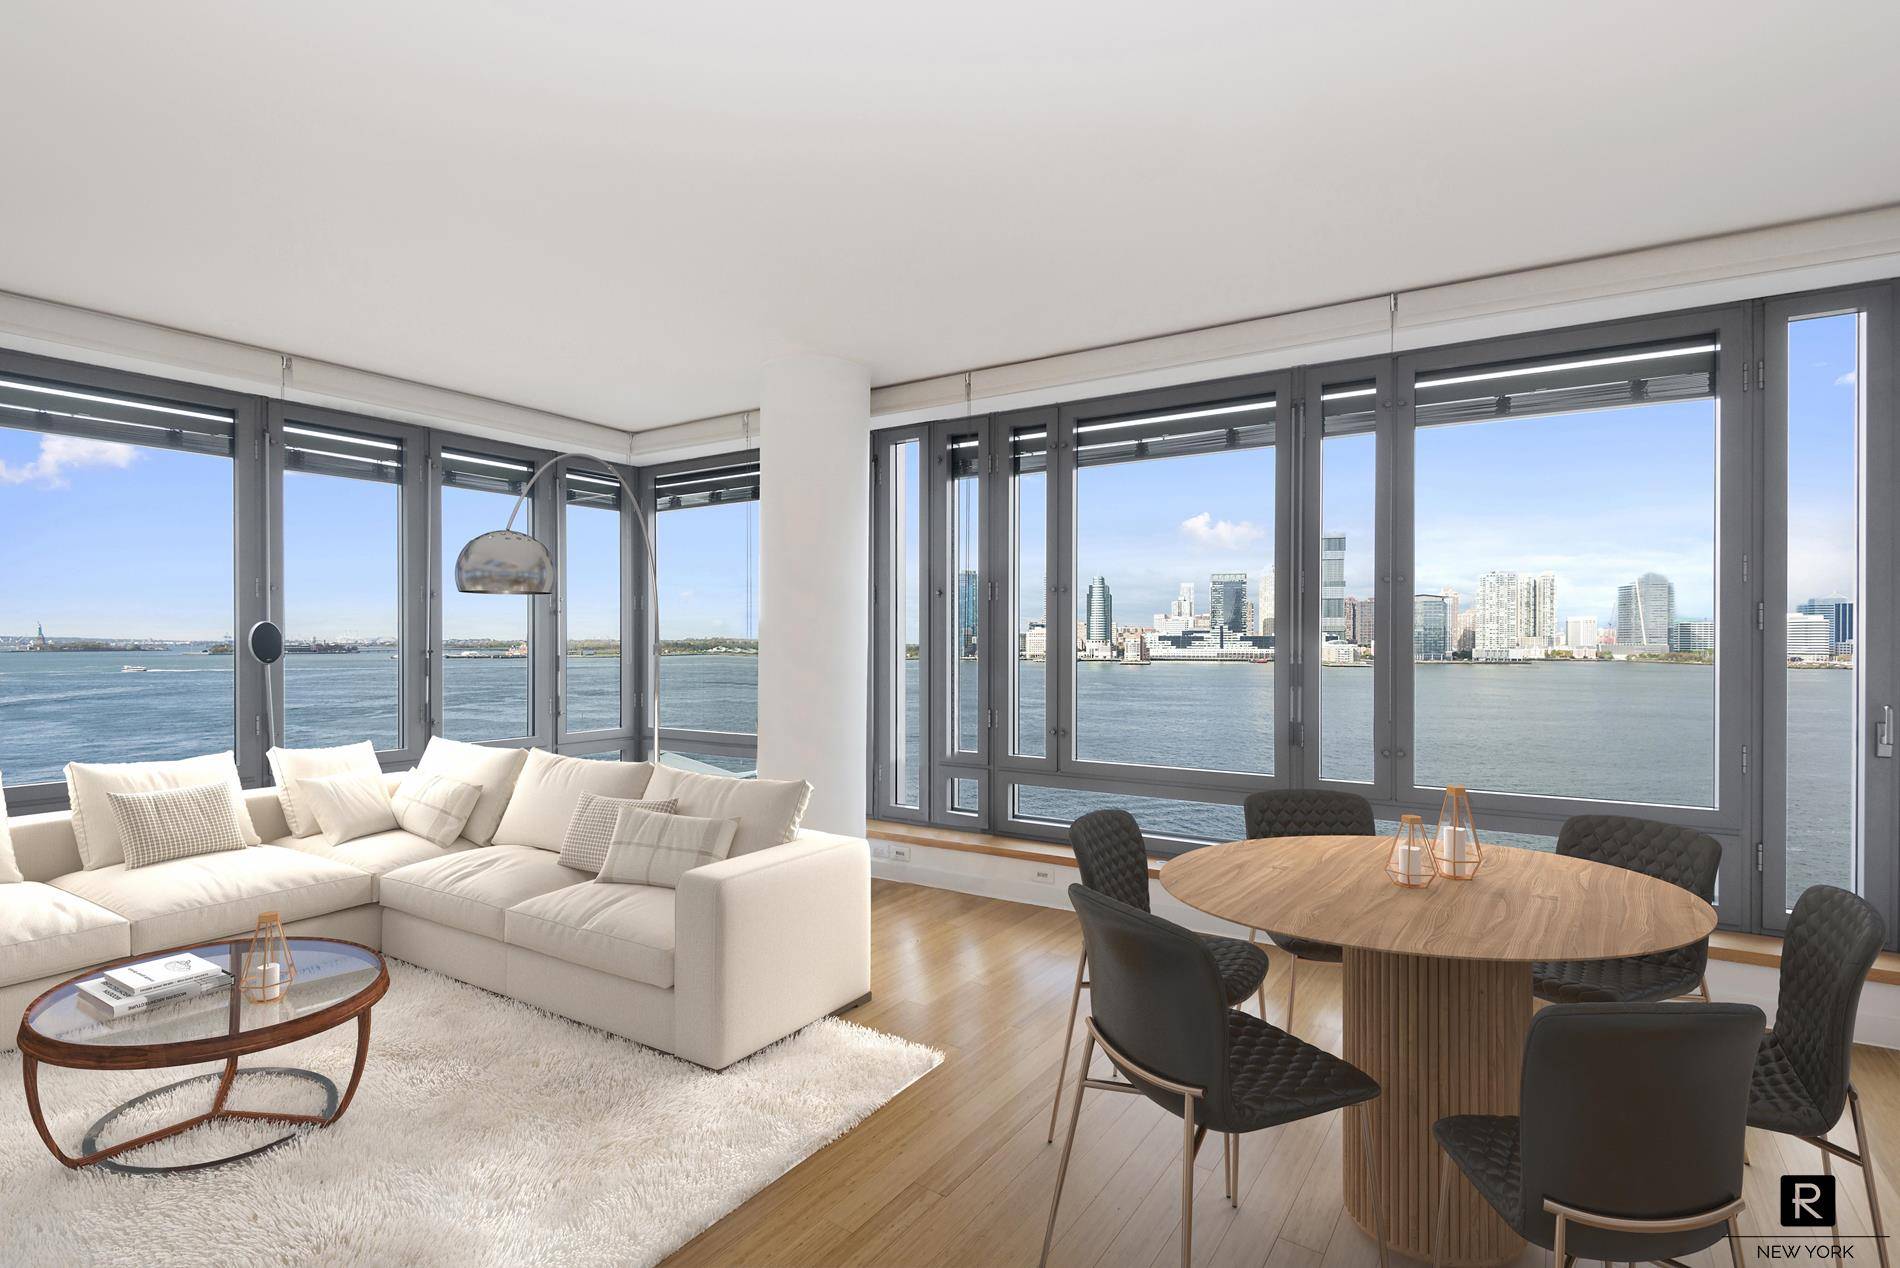 Spacious three bed four bath apartment in the Riverhouse, the only LEED certified Green condominium in North Battery Park West Tribeca.